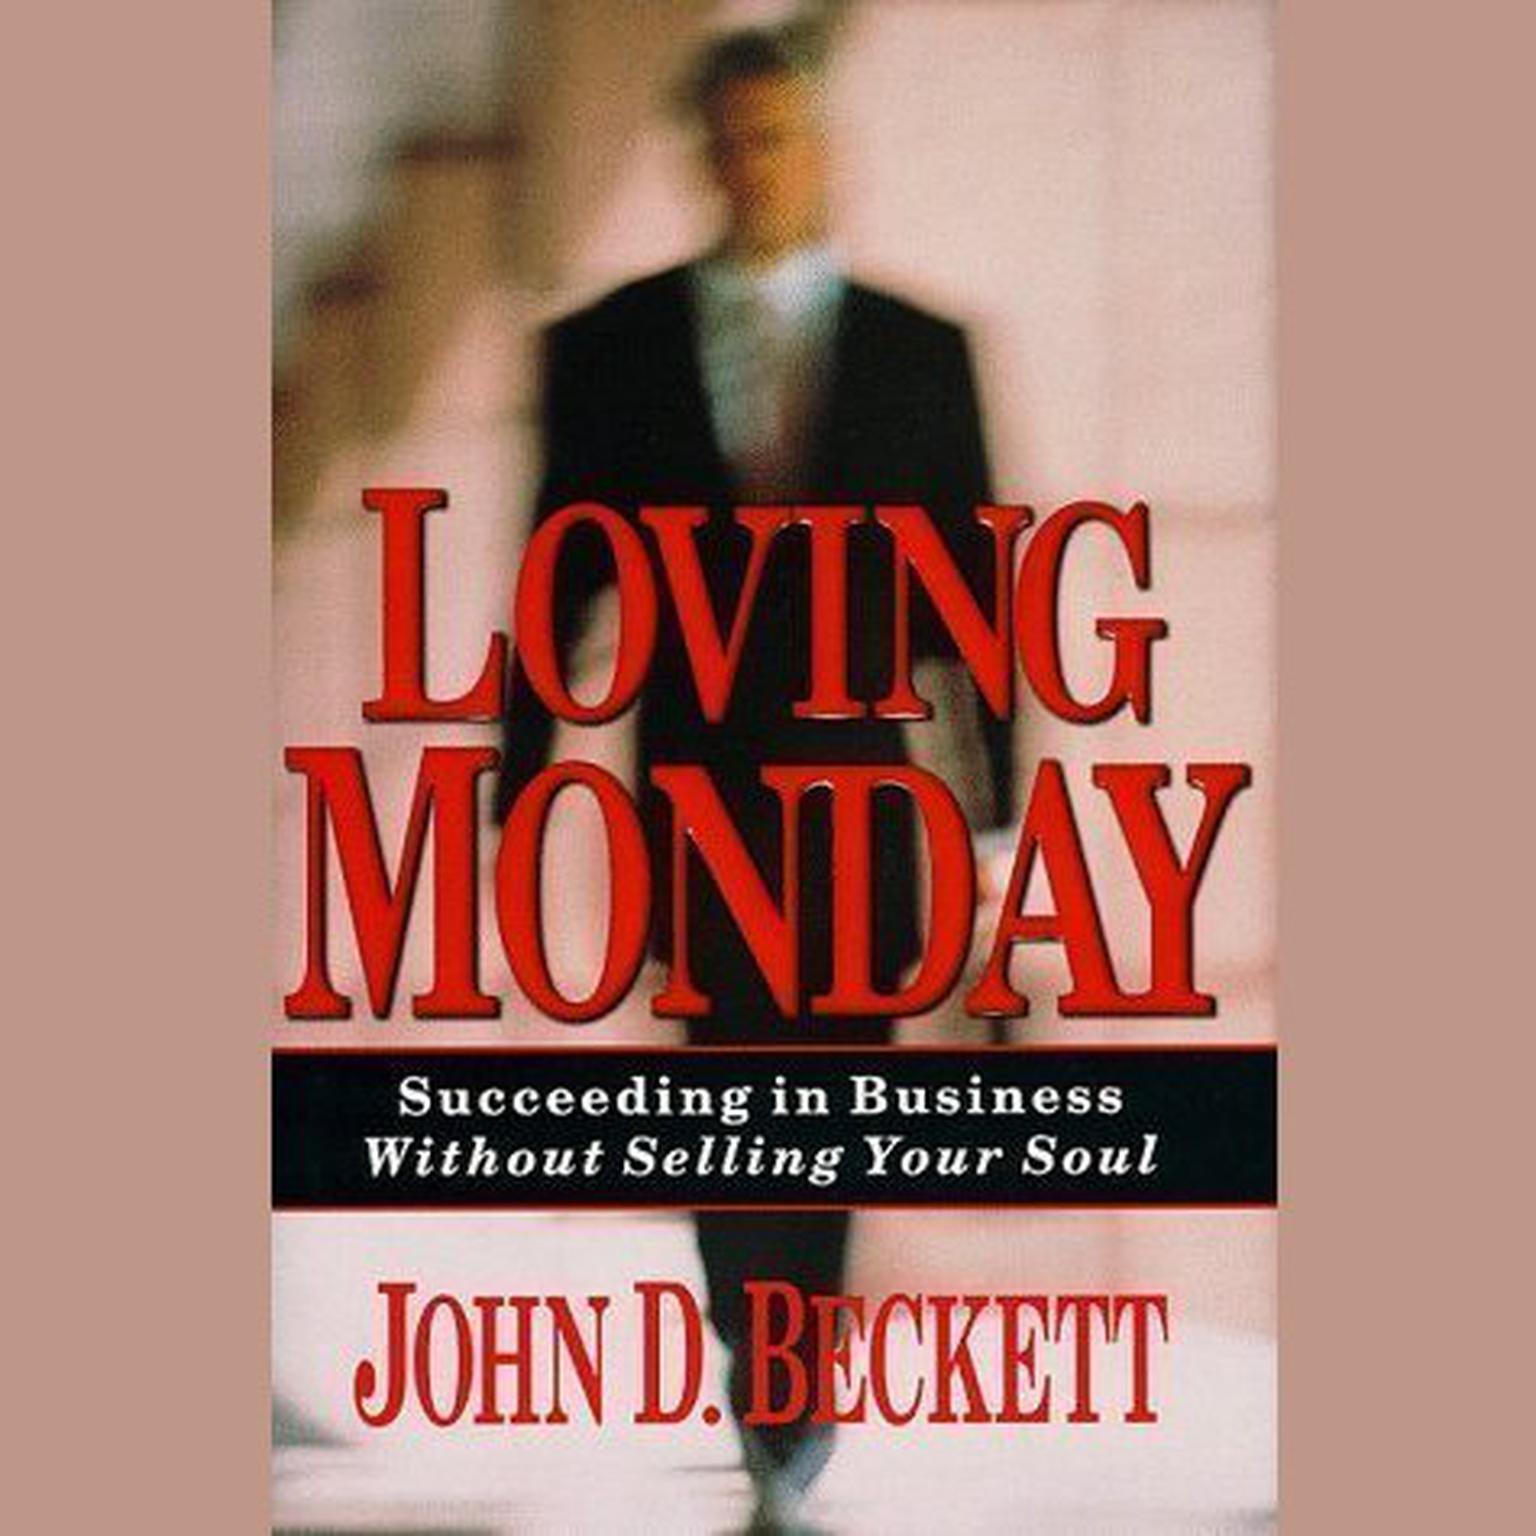 Loving Monday (Abridged): Succeeding in Business Without Selling Your Soul Audiobook, by John D. Beckett